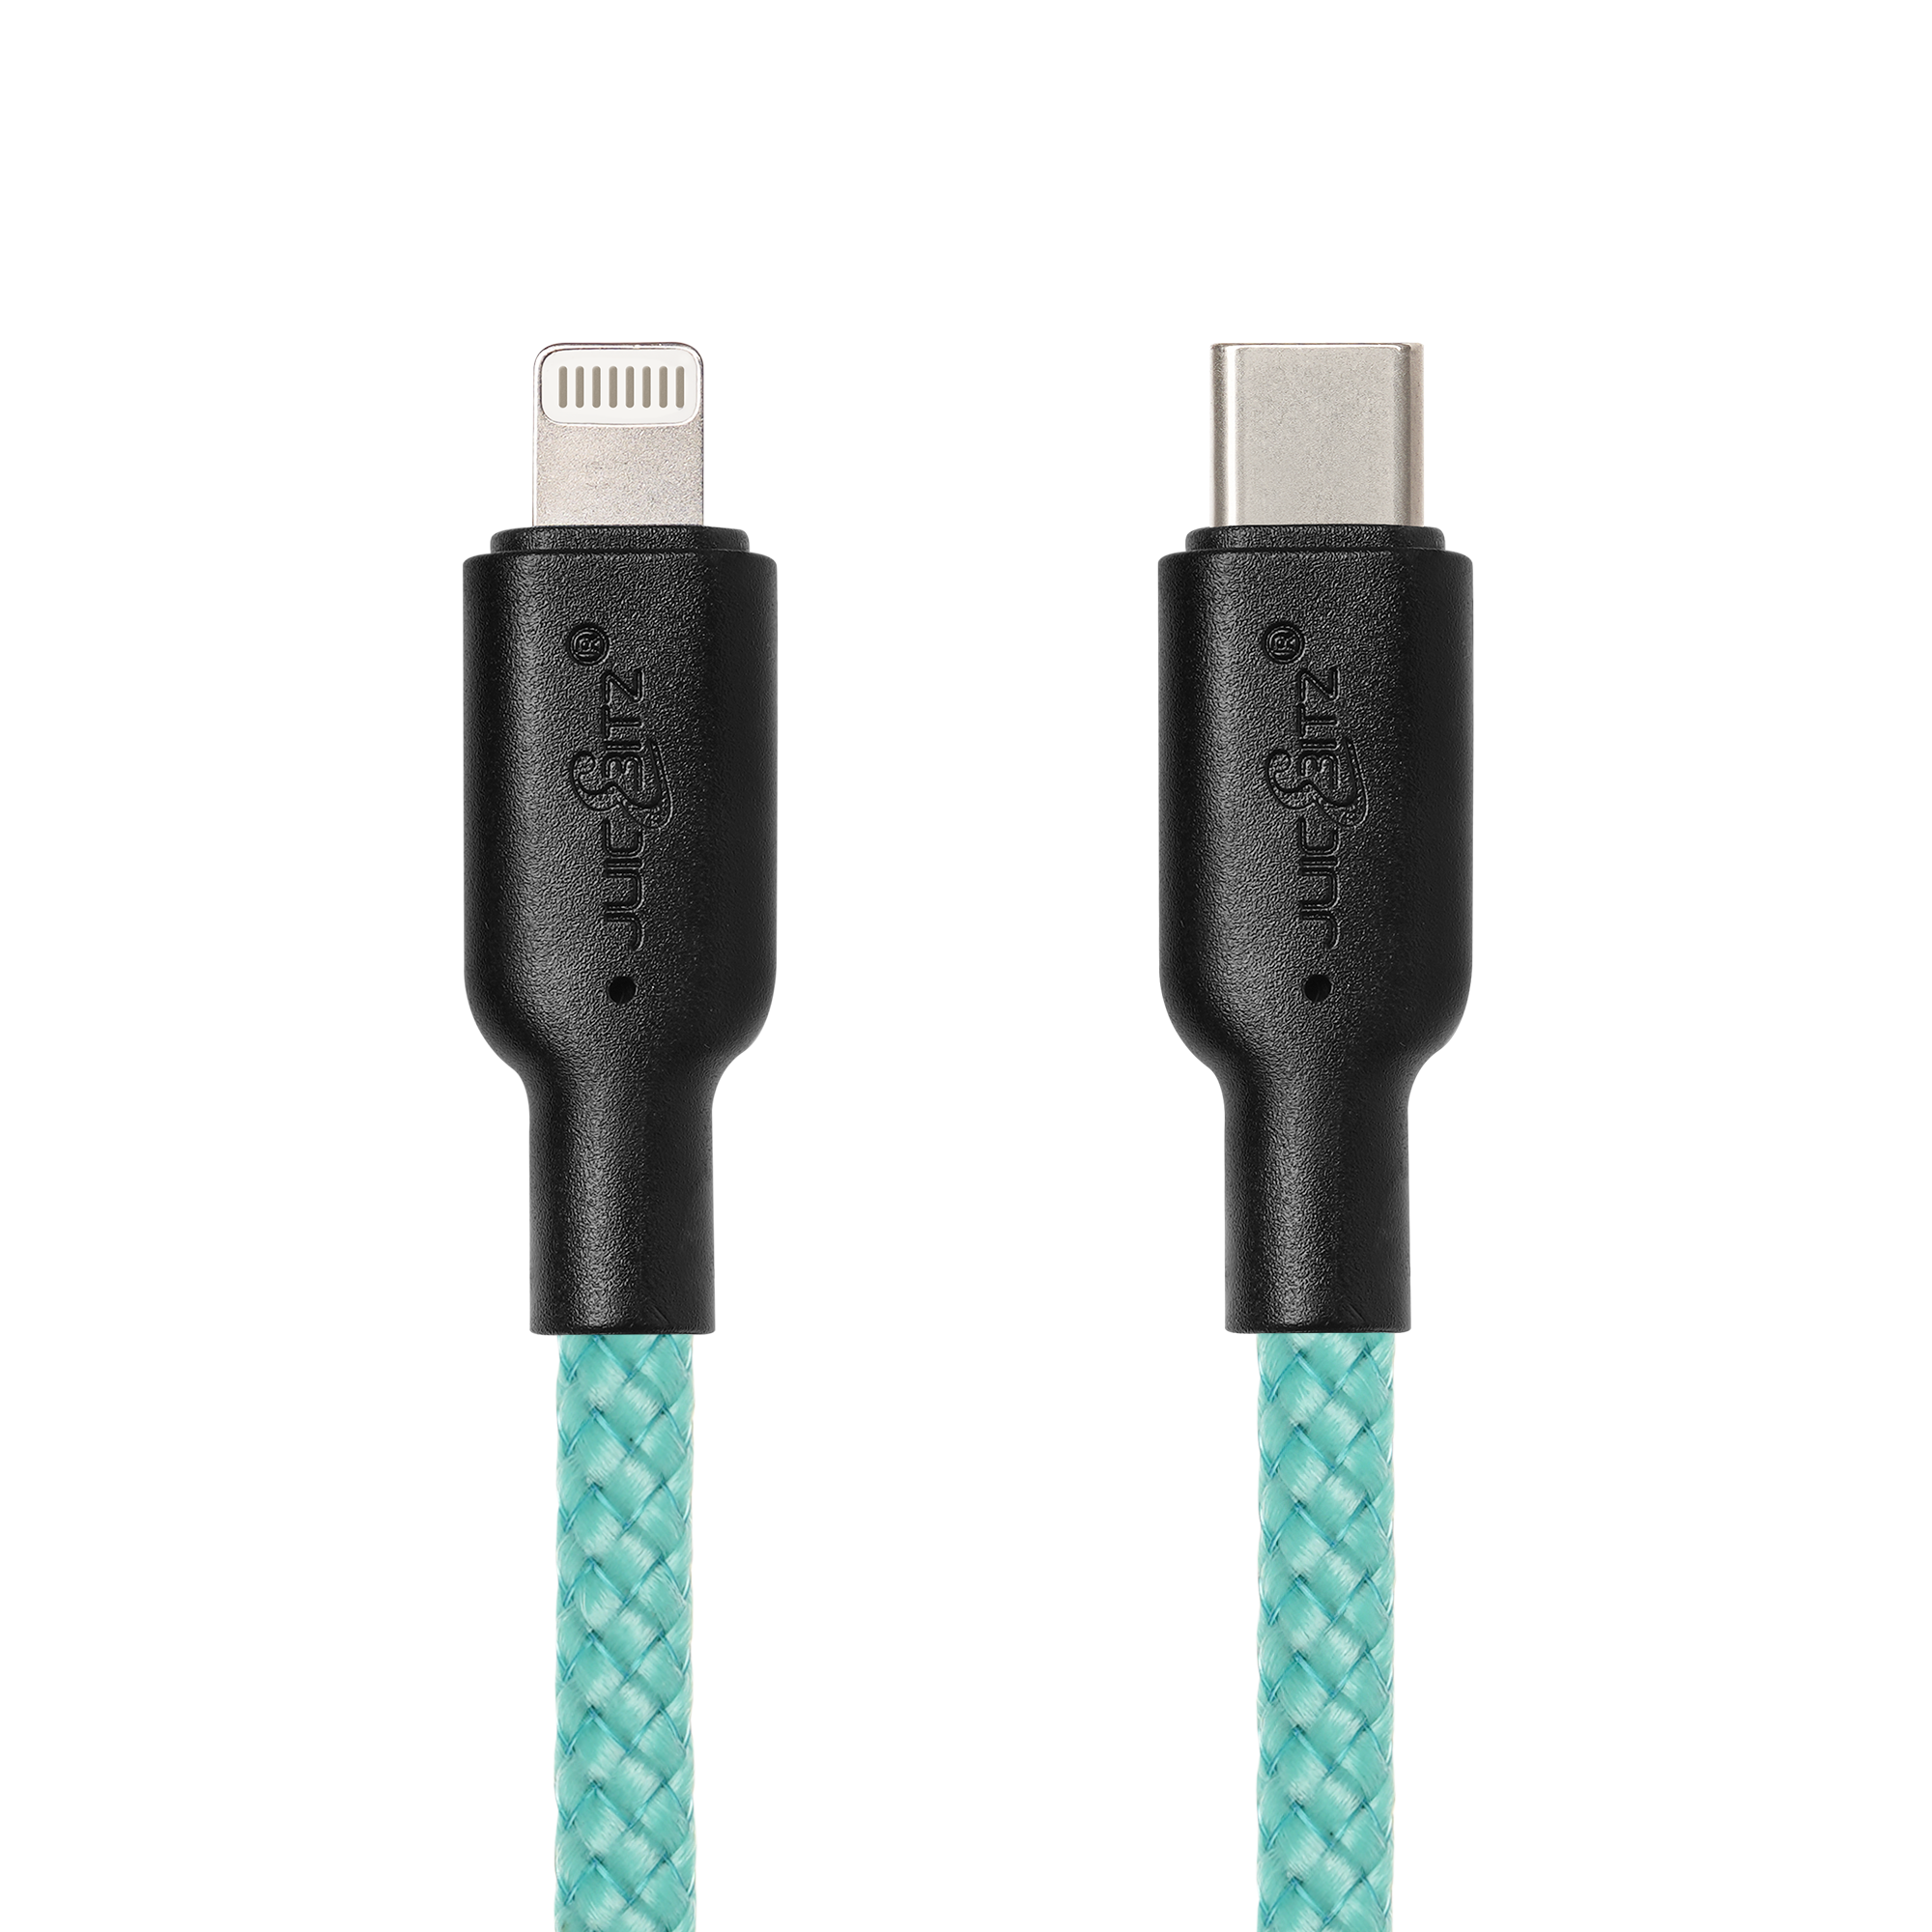 Braided Heavy Duty USB-C Fast Charger Data Sync Cable for iPhone, iPad, iPod - Turquoise